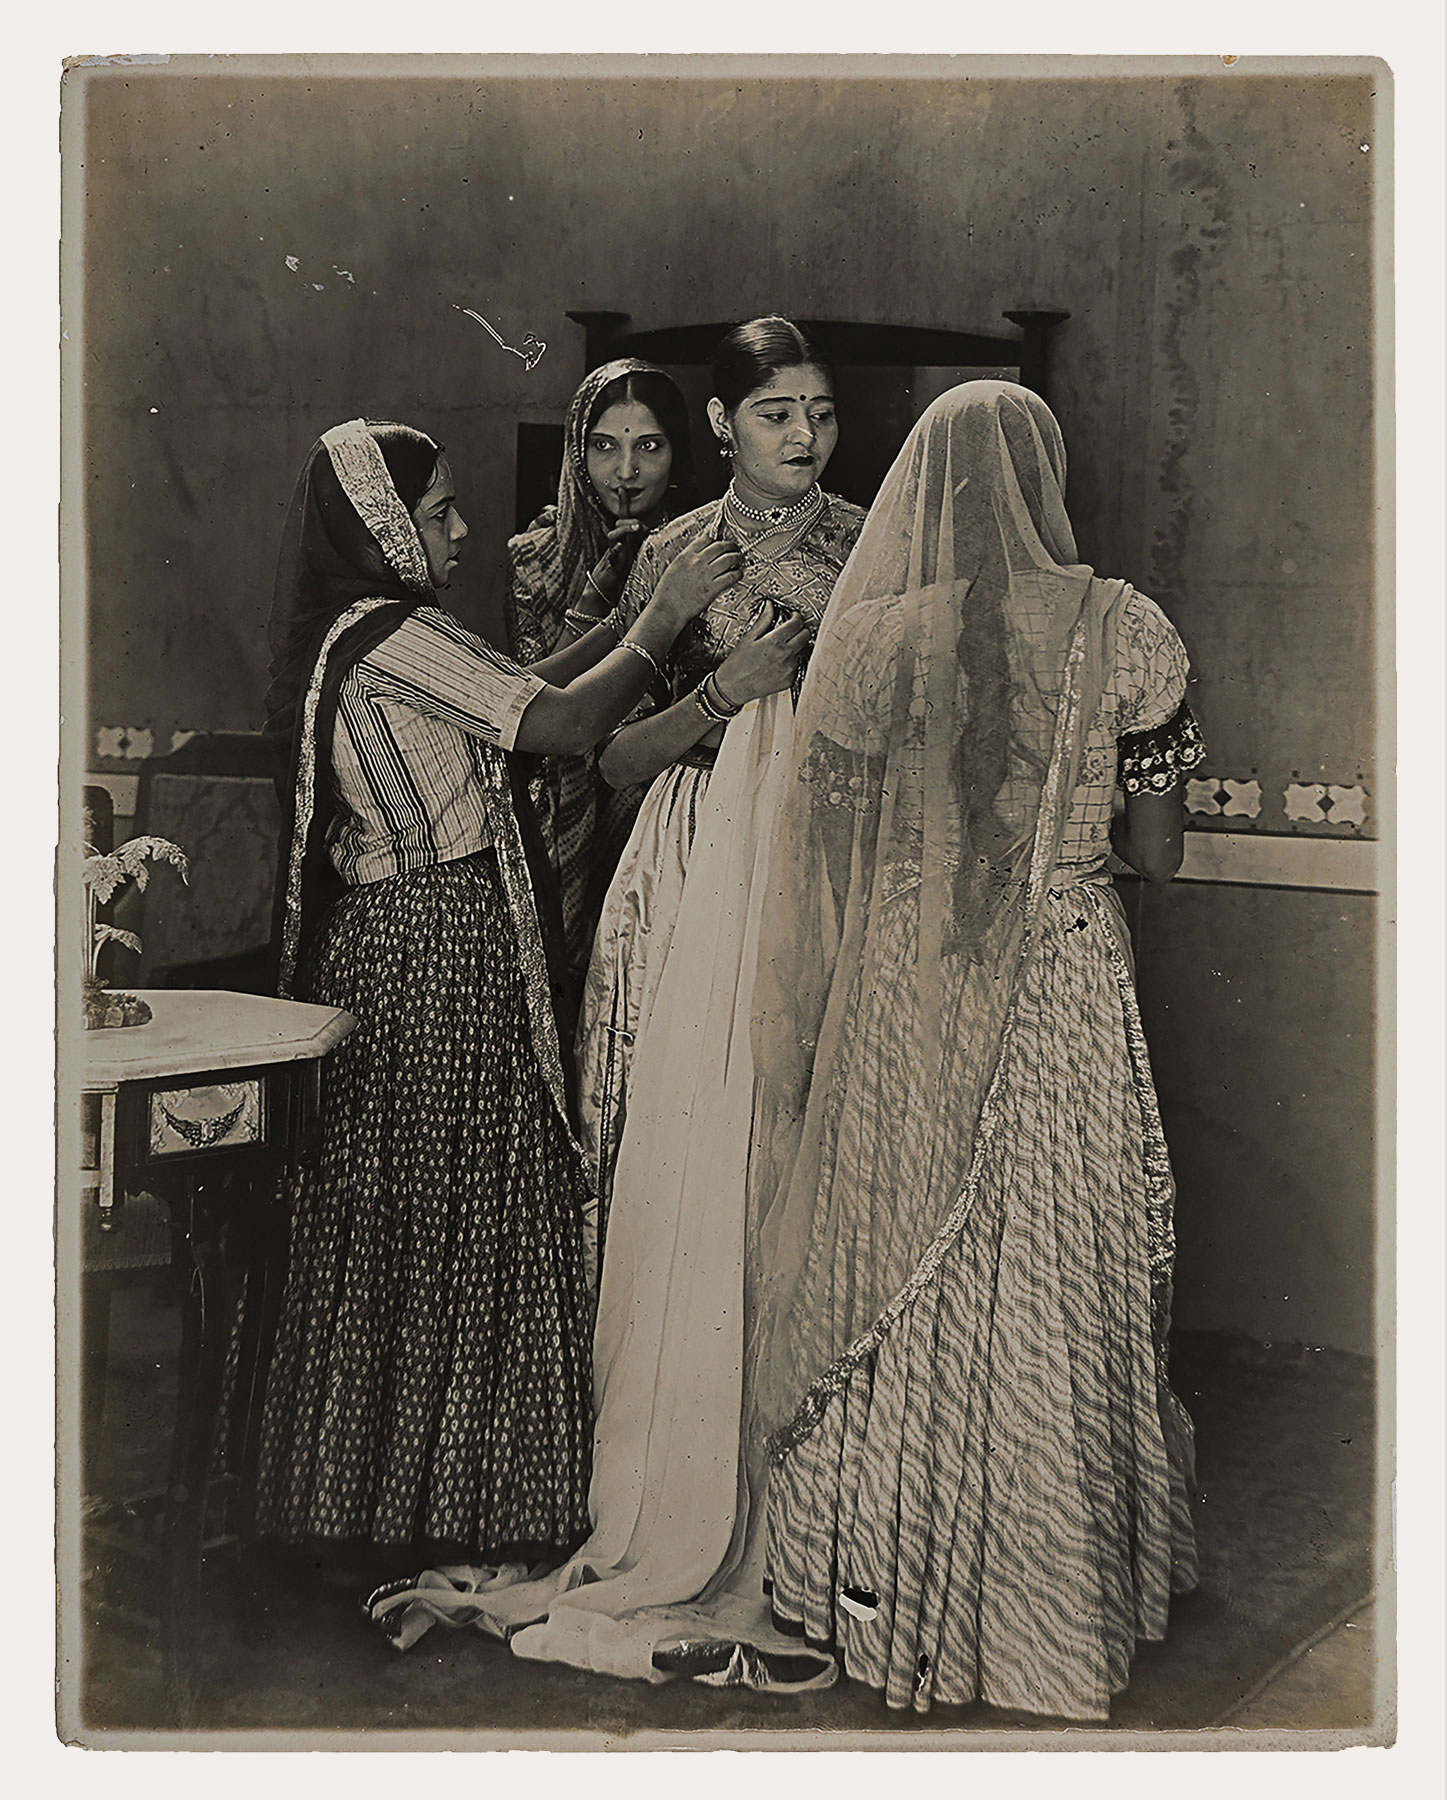 A woman stands in an enclosed space with a tilted head, holding a long piece of fabric close to her chest. In front of her, is the back of another woman and beside her, is a different woman trying to adjust her jewelry, facing sideways. Behind the three women is a fourth woman with her hand on her lips.